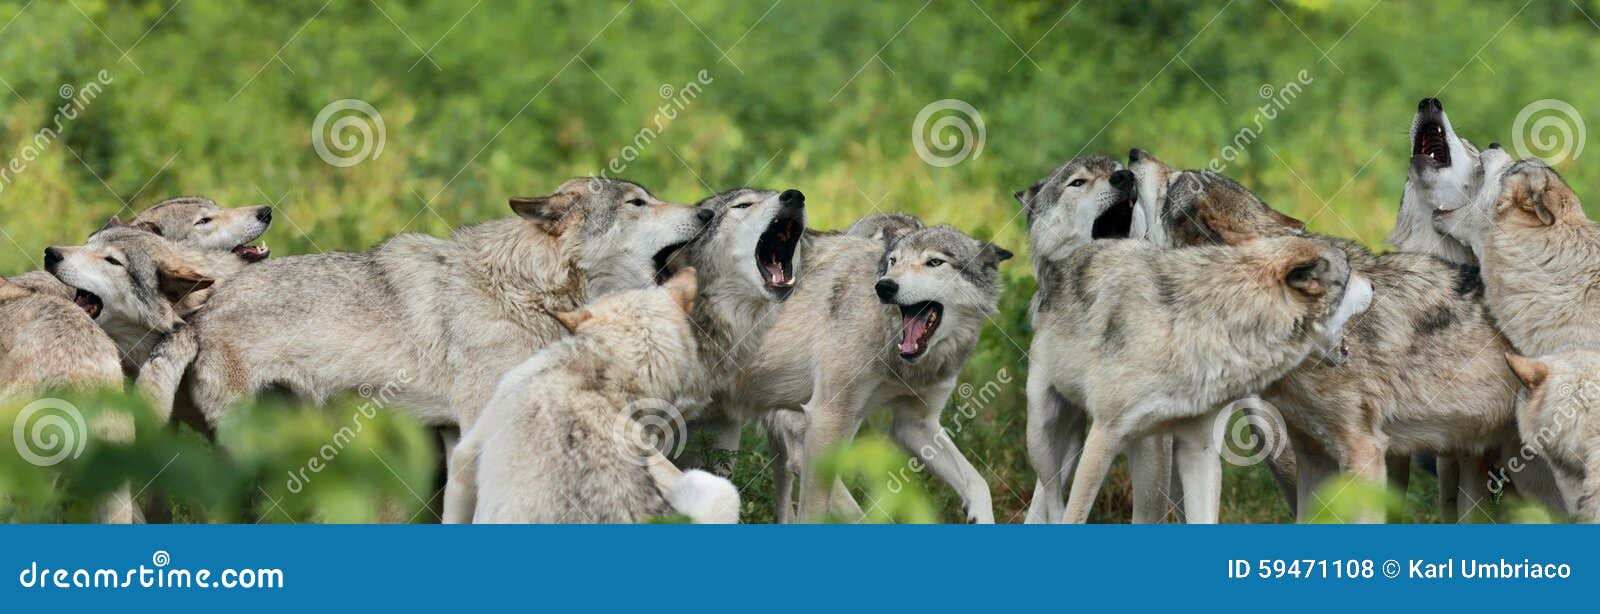 pack of gray wolf